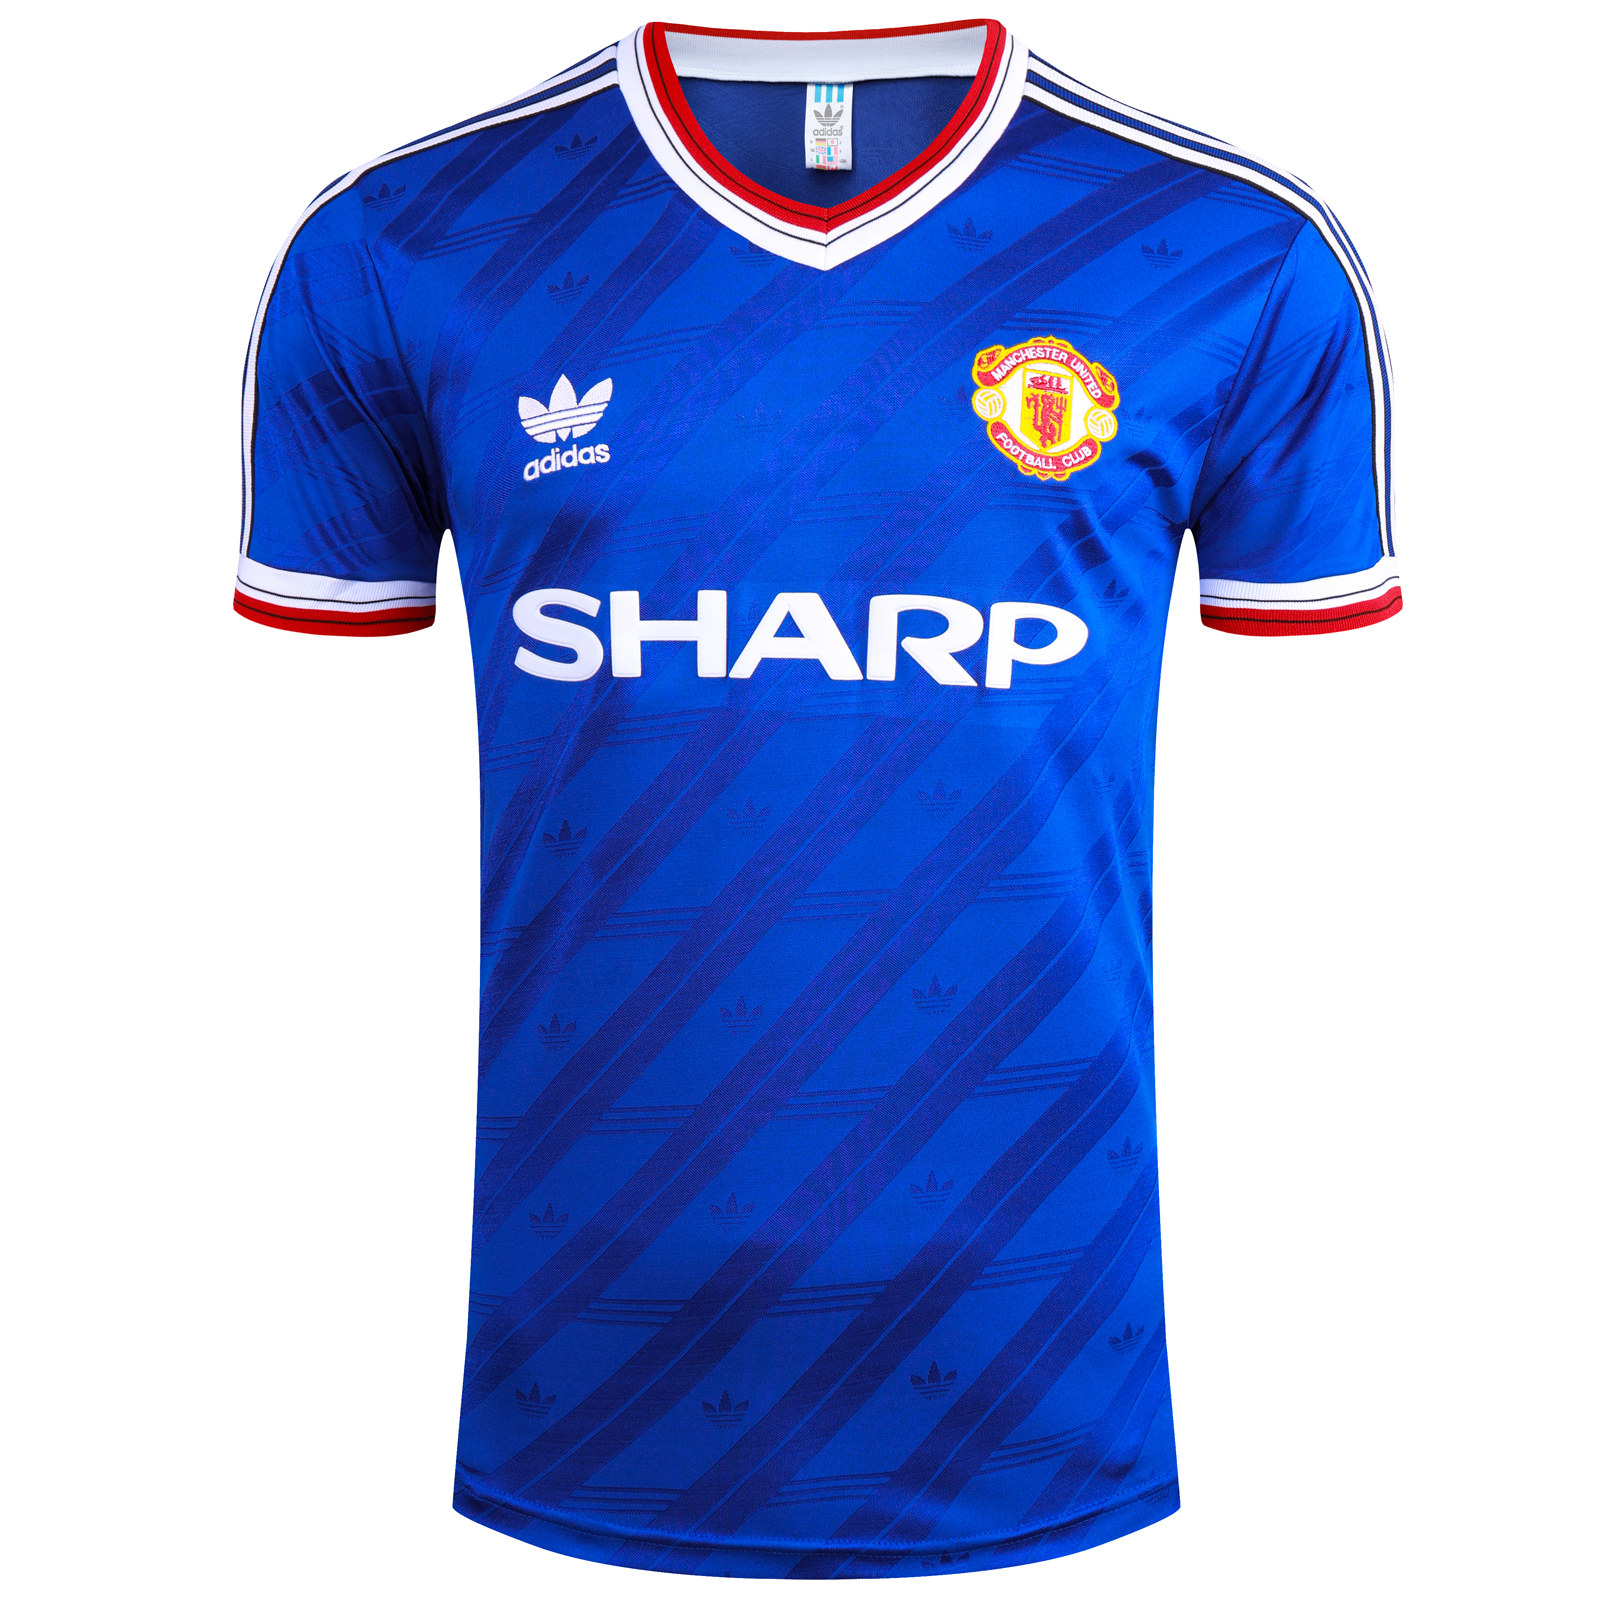 US$ 18.80 - Manchester United Retro Away Jersey Mens 1986/1987 - www